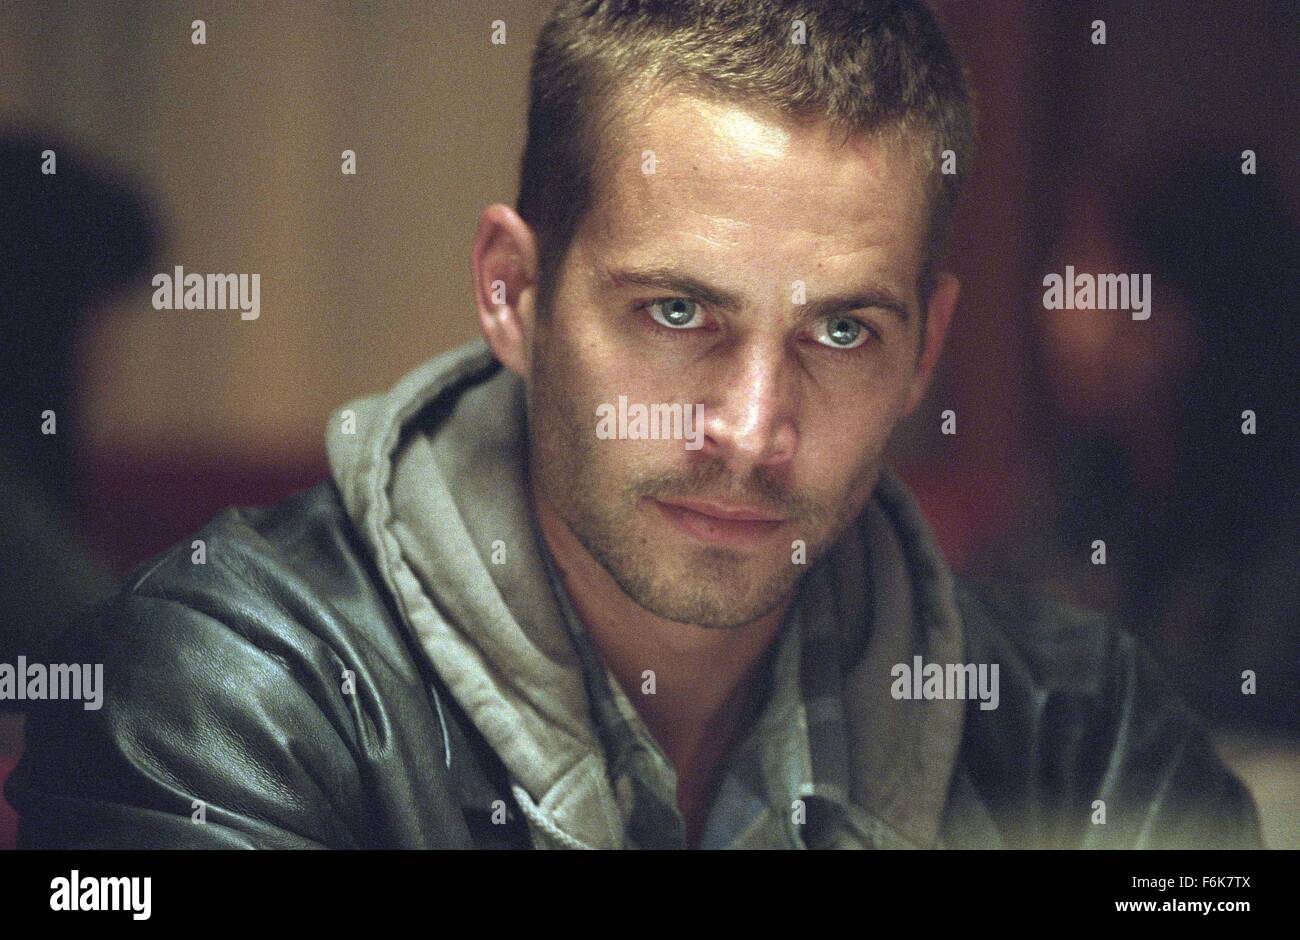 Jan 18, 2006; Newark, NJ, USA; Actor PAUL WALKER stars as Joey Gazelle in the Wayne Kramer directed Action drama 'Running Scared.' Set to be released February 24, 2006. Mandatory Credit: Photo by J Clifford/New Line Cinema. (Ac) Copyright 2006 by Courtesy of New Line Cinema Stock Photo